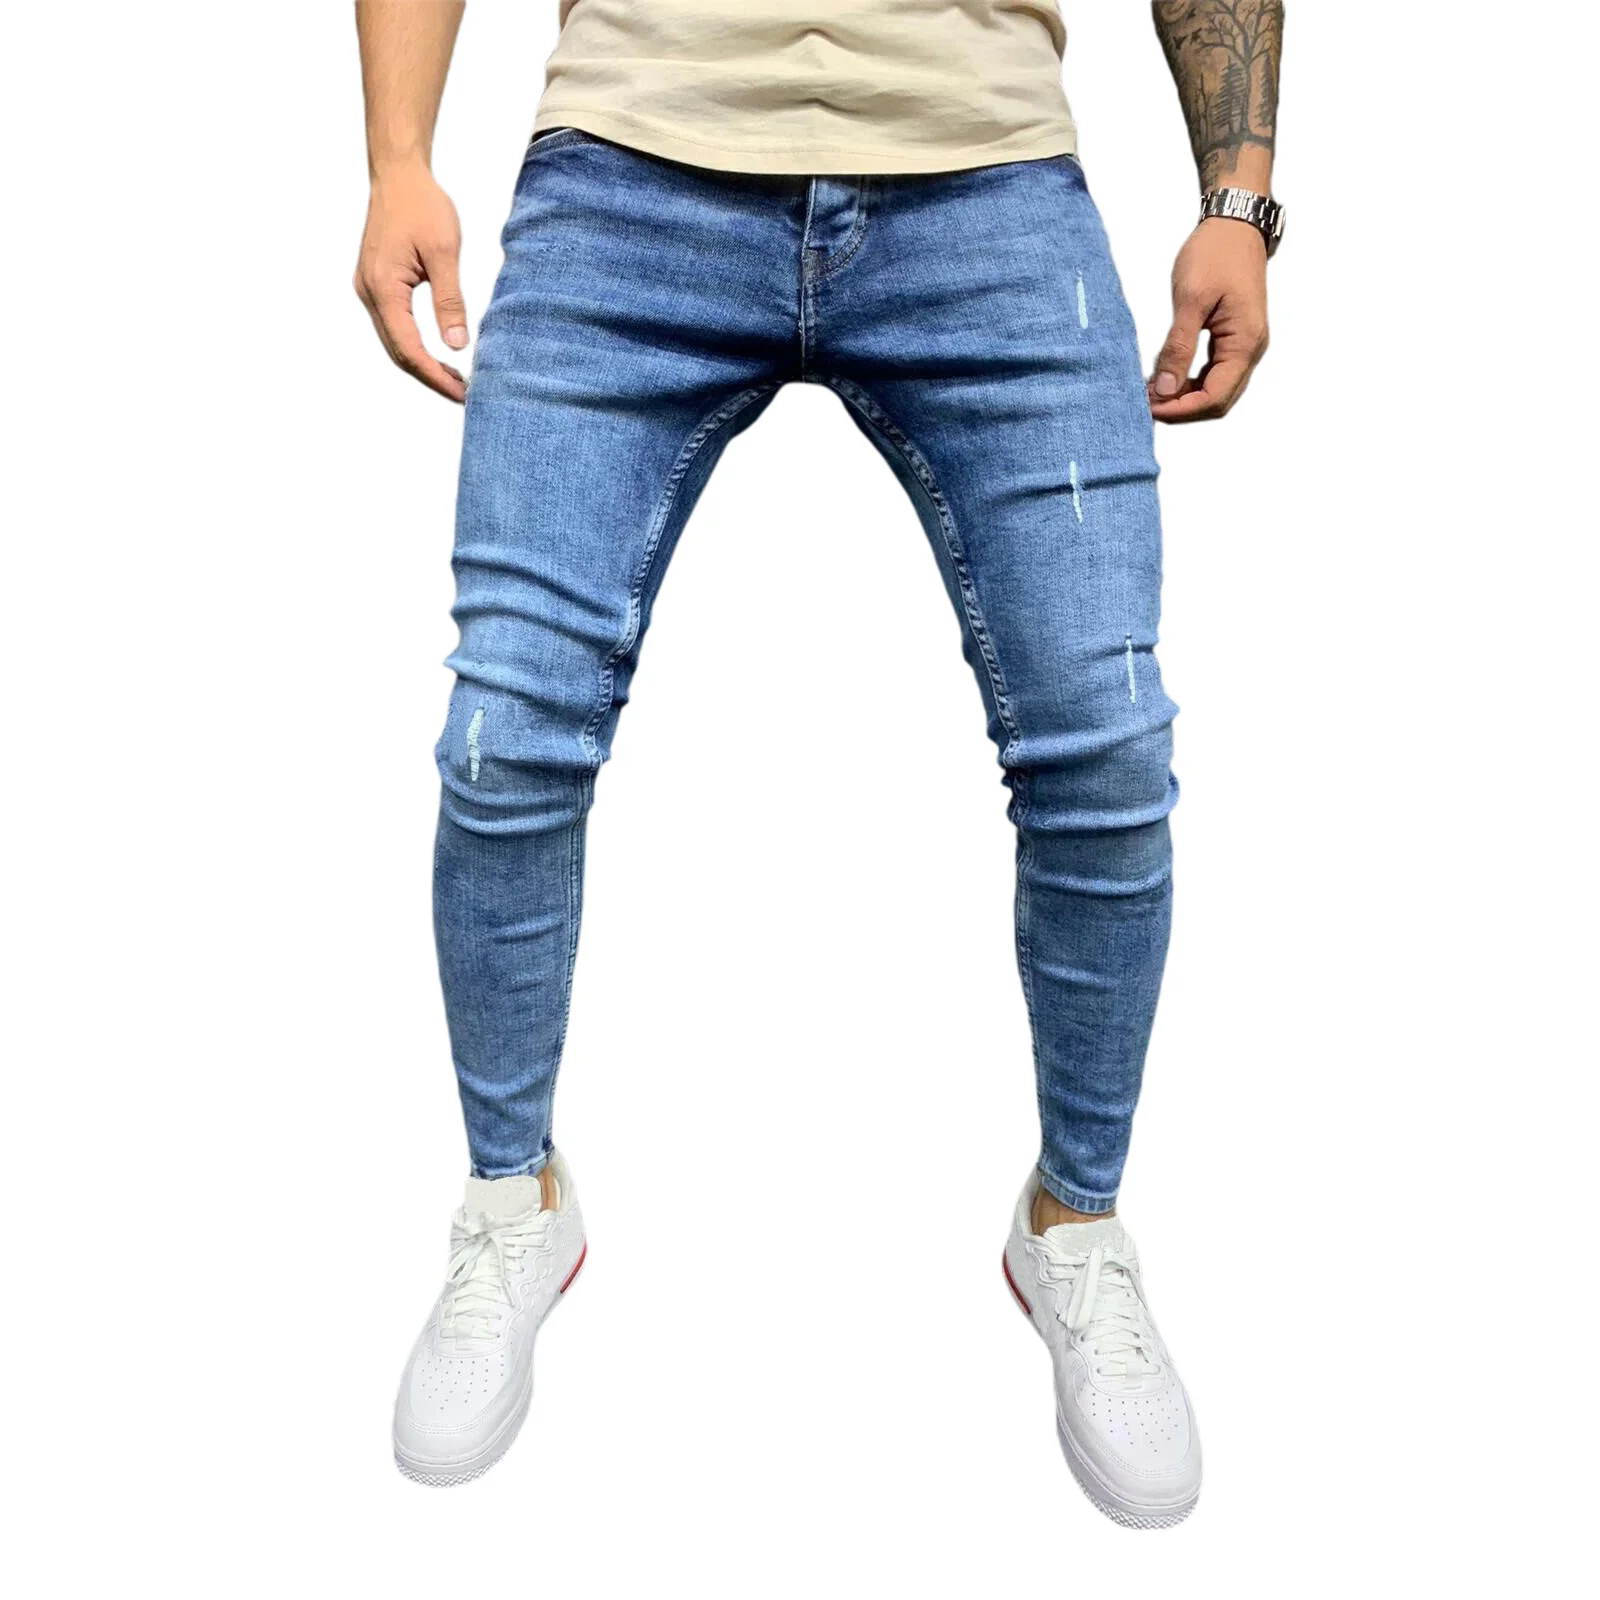 

Mens Jean New Pencil Pants Fashion Men Casual Slim Fit Straight Stretch Feet Skinny Zipper Jeans For Male Hot Sell Trousers